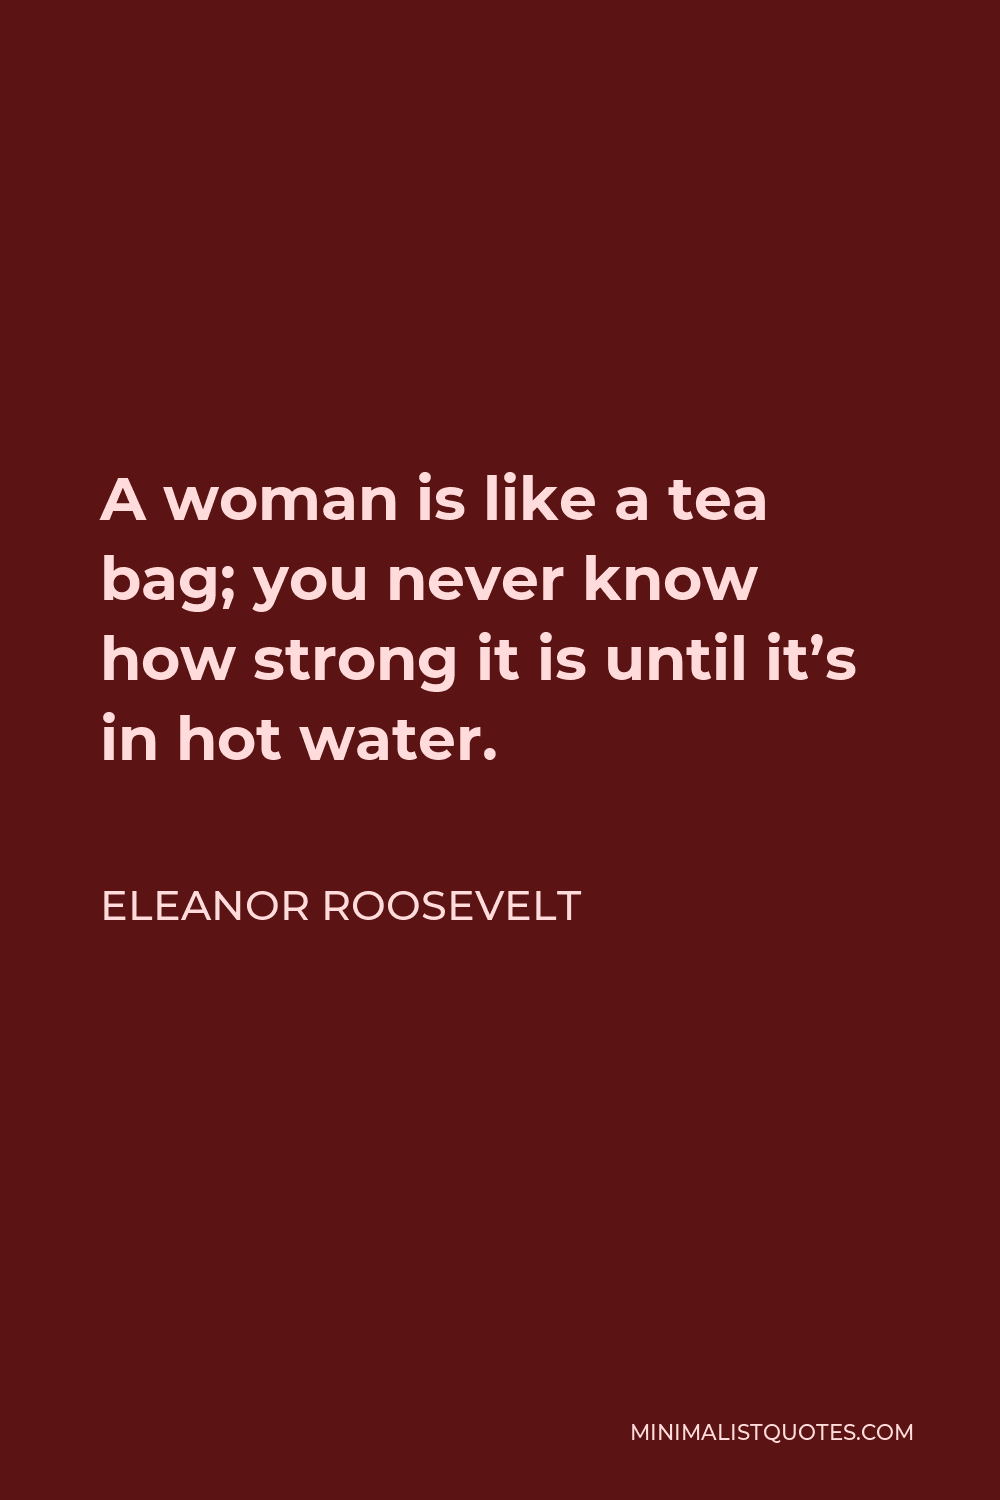 Eleanor Roosevelt Quote - A woman is like a tea bag; you never know how strong it is until it’s in hot water.